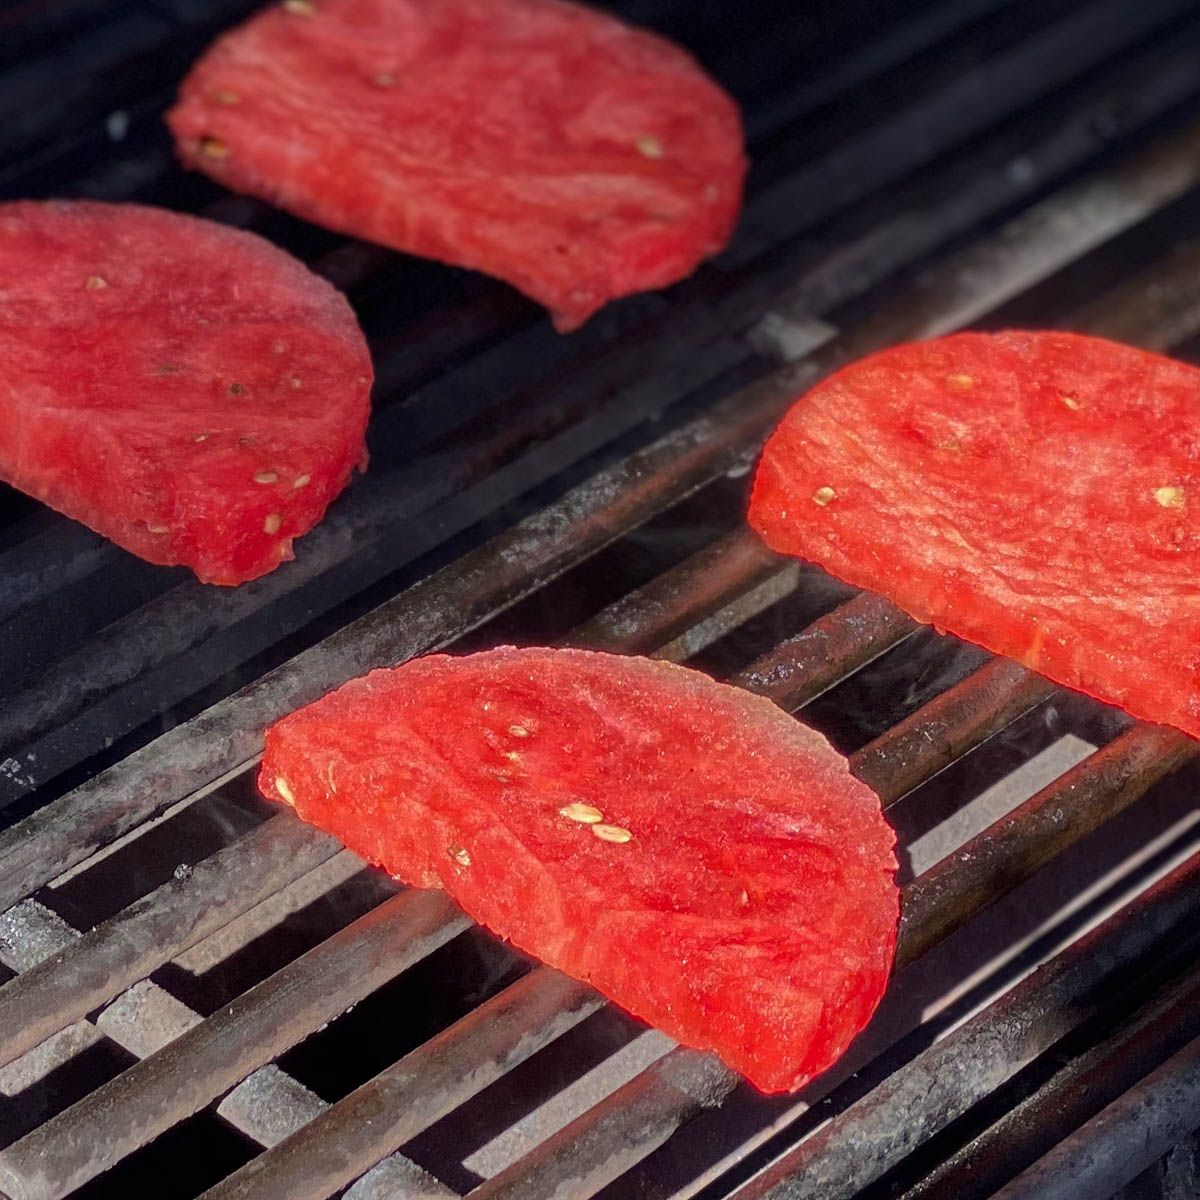 Slices of watermelon grilling on barbecue.